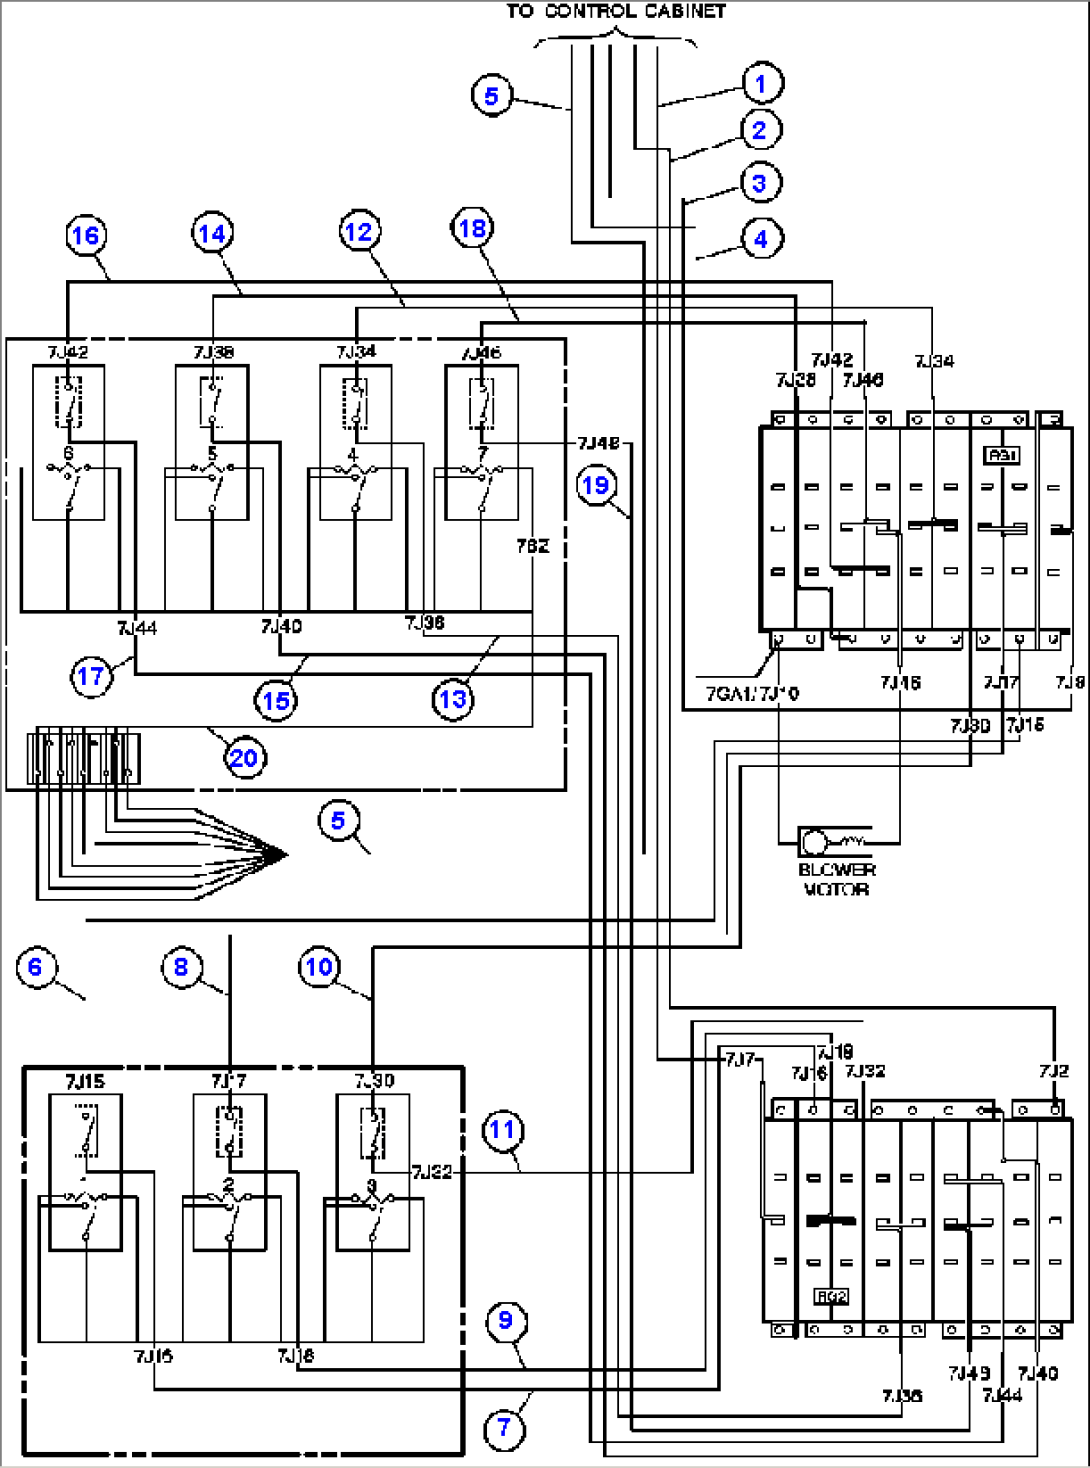 ELECTRIC POWER COMPONENTS WIRING - 1